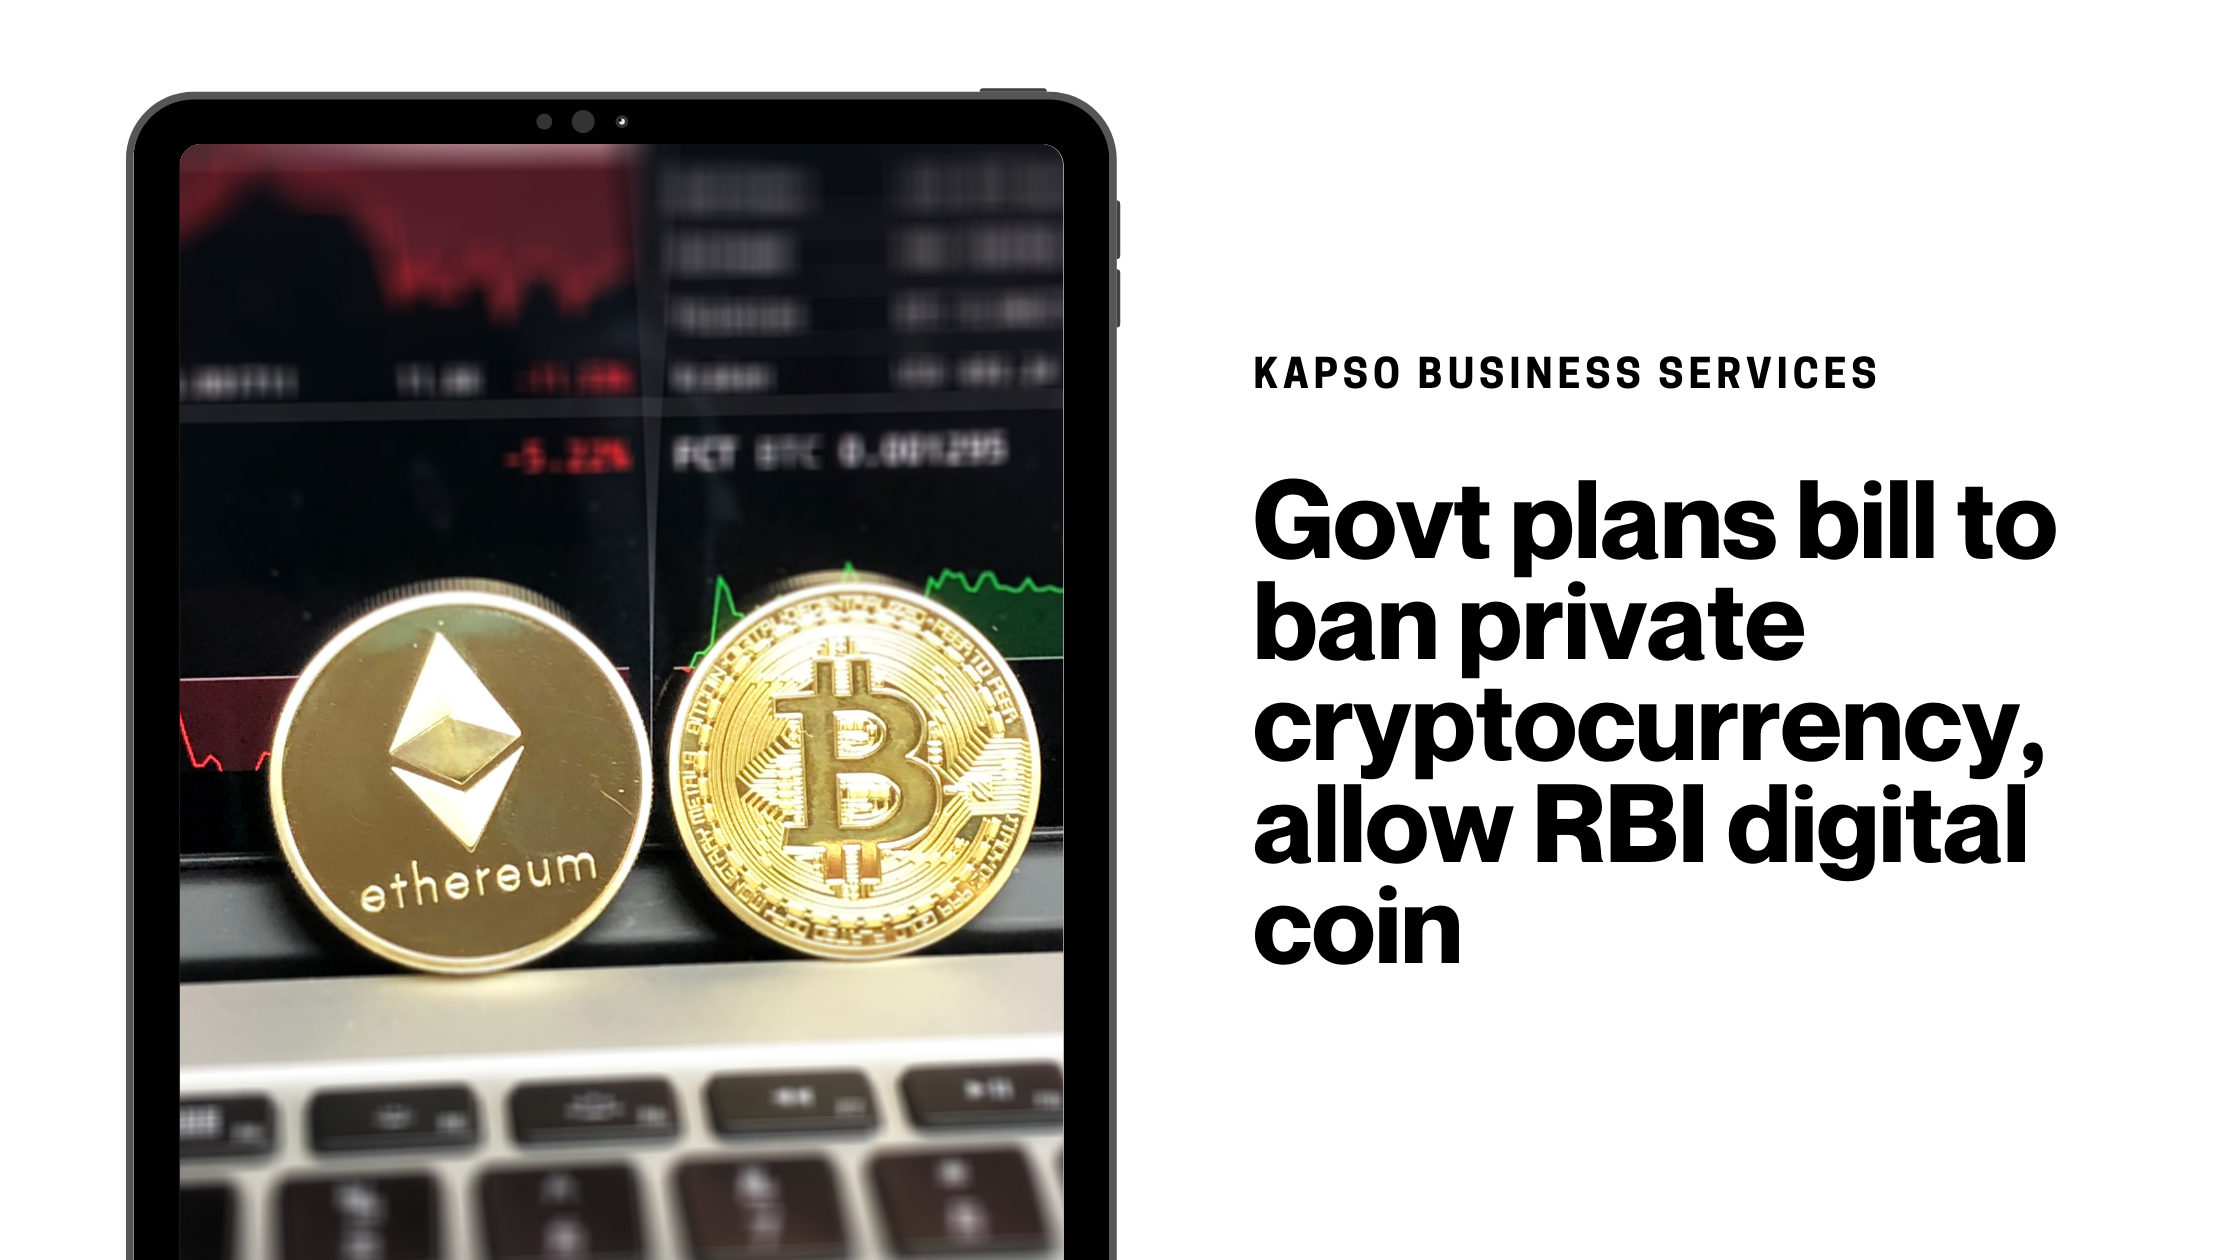 Govt plans bill to ban private cryptocurrency, allow RBI digital coin